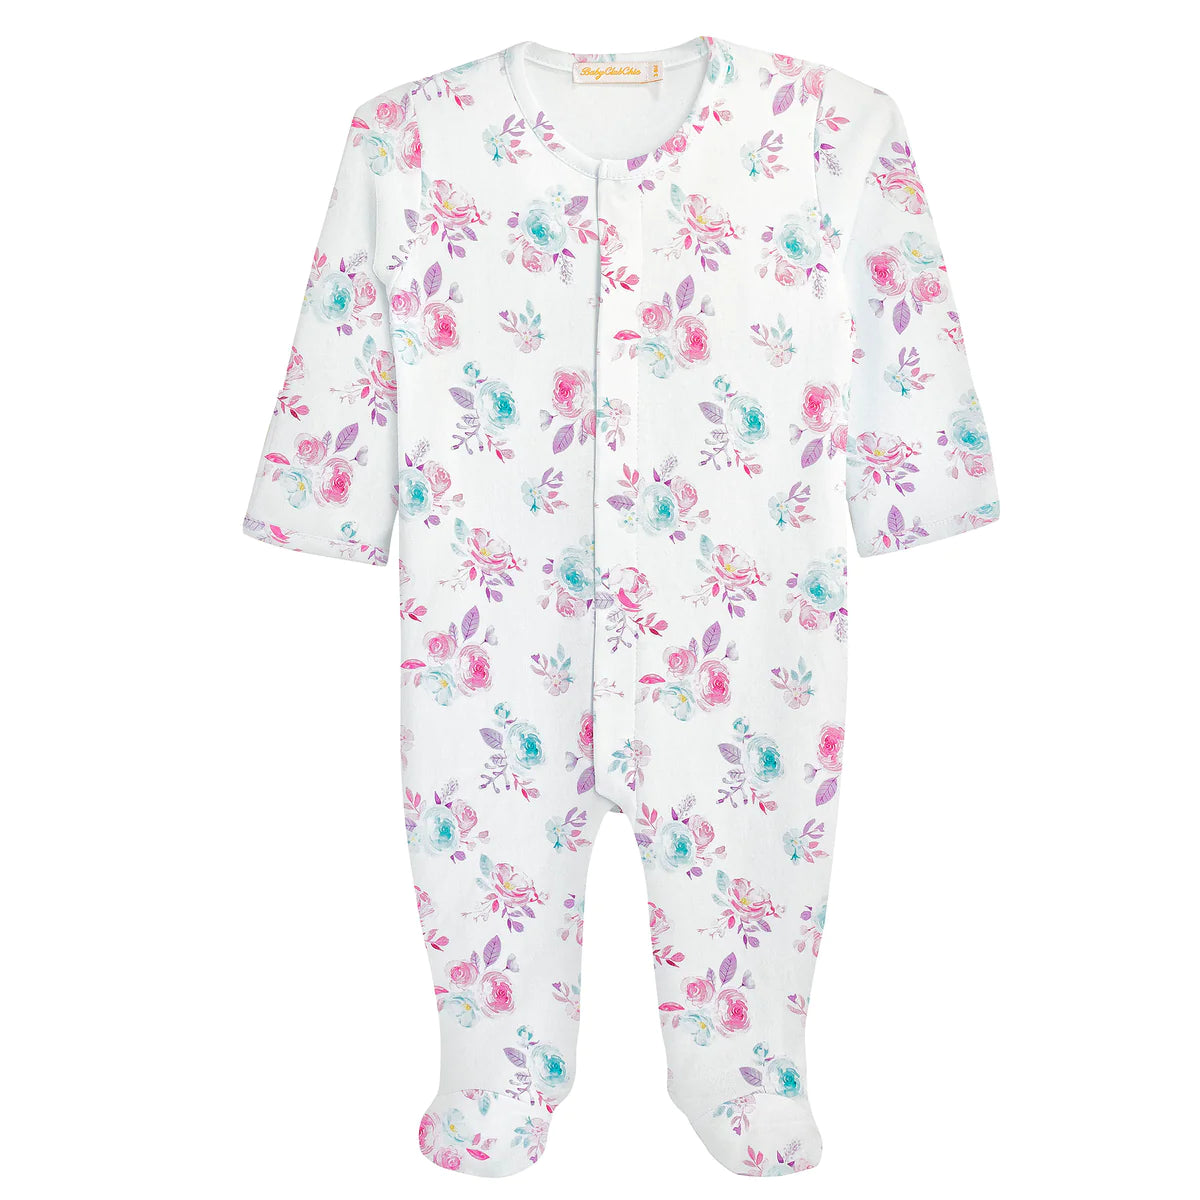 Lilly floral footie